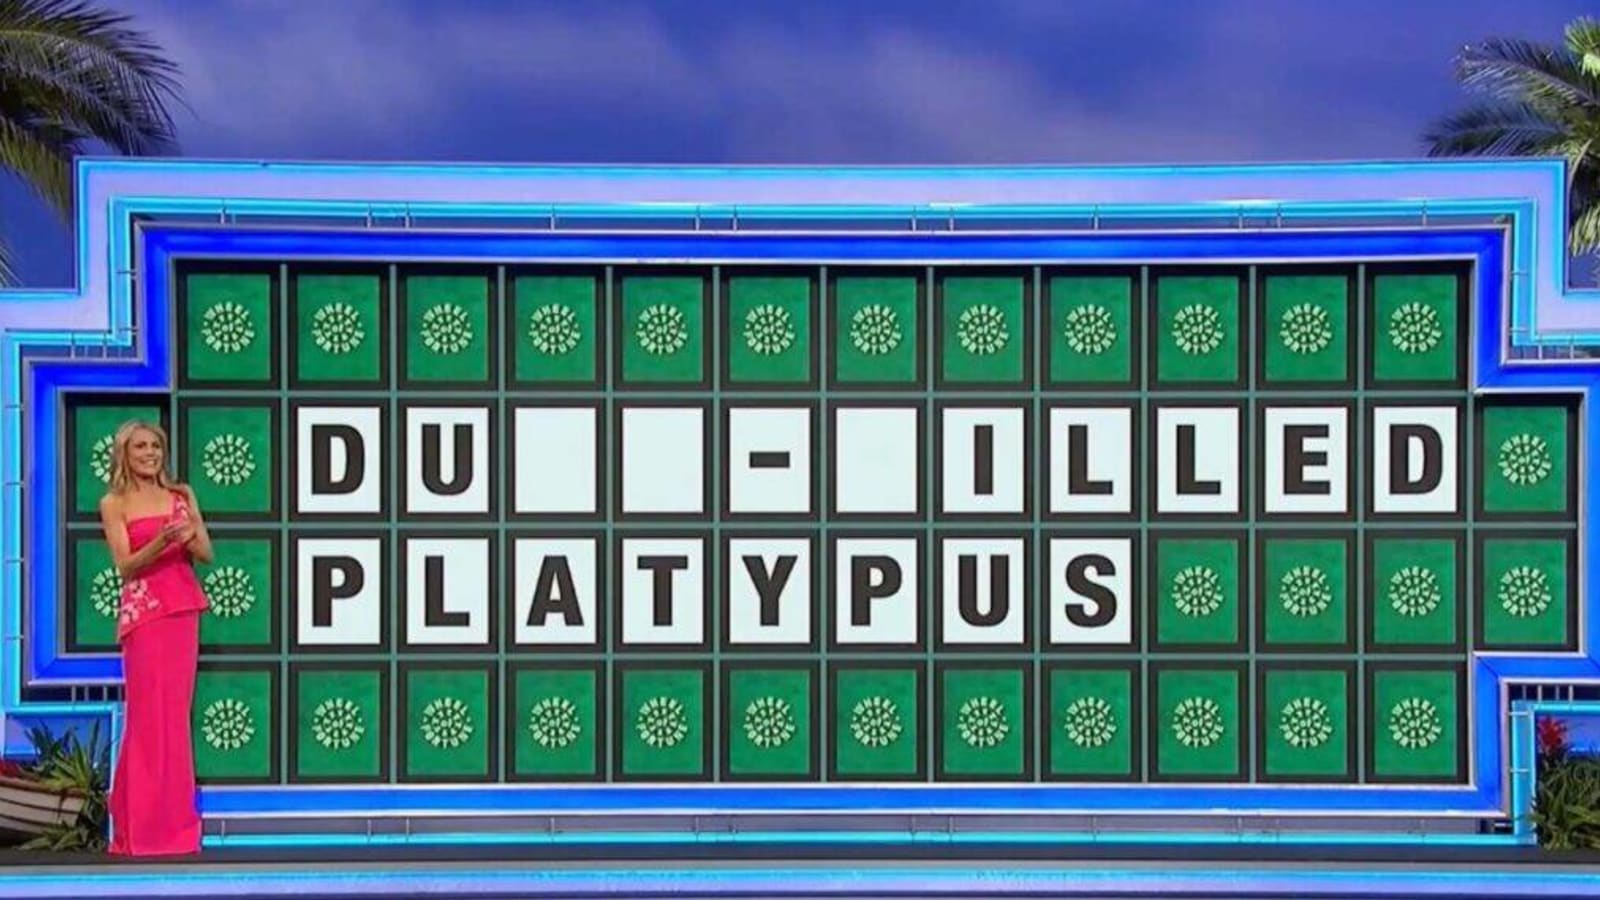 ‘Wheel of Fortune’ Fans Shocked By Contestant’s ‘Painful’ Letter Pick on Easy Puzzle